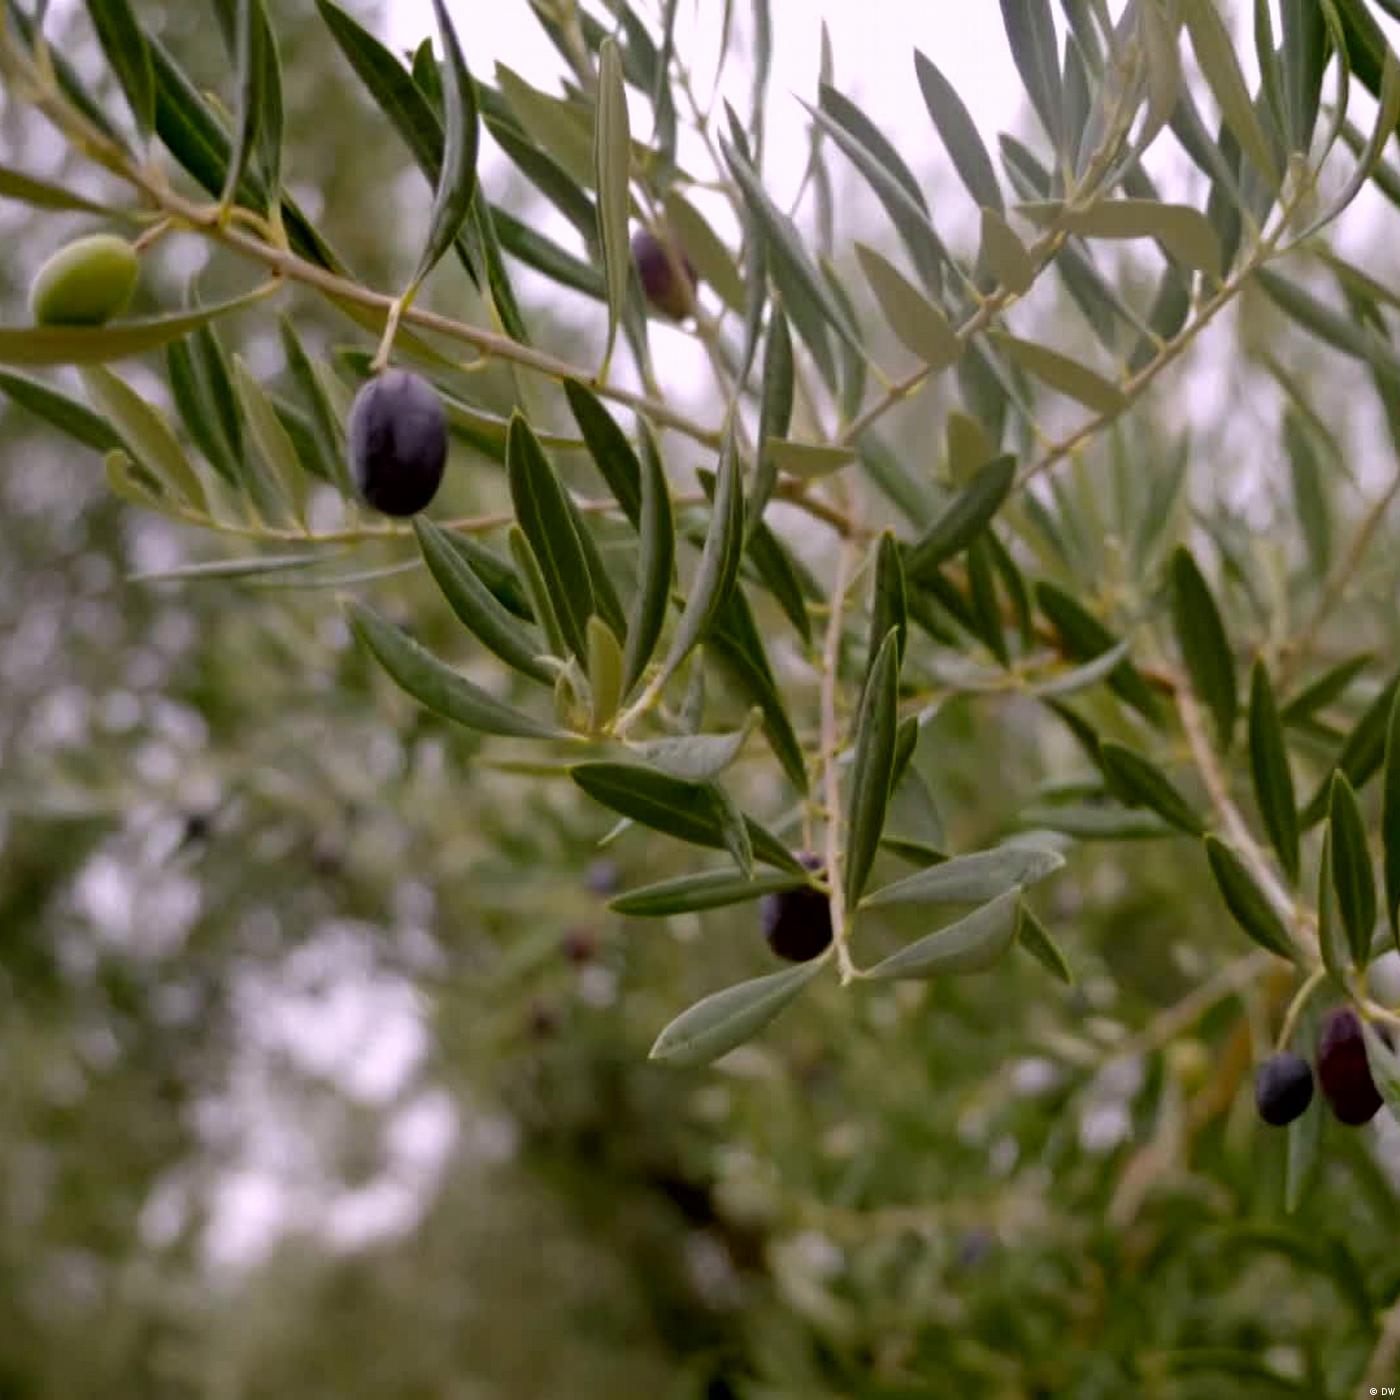 Spain – Olive growers in crisis